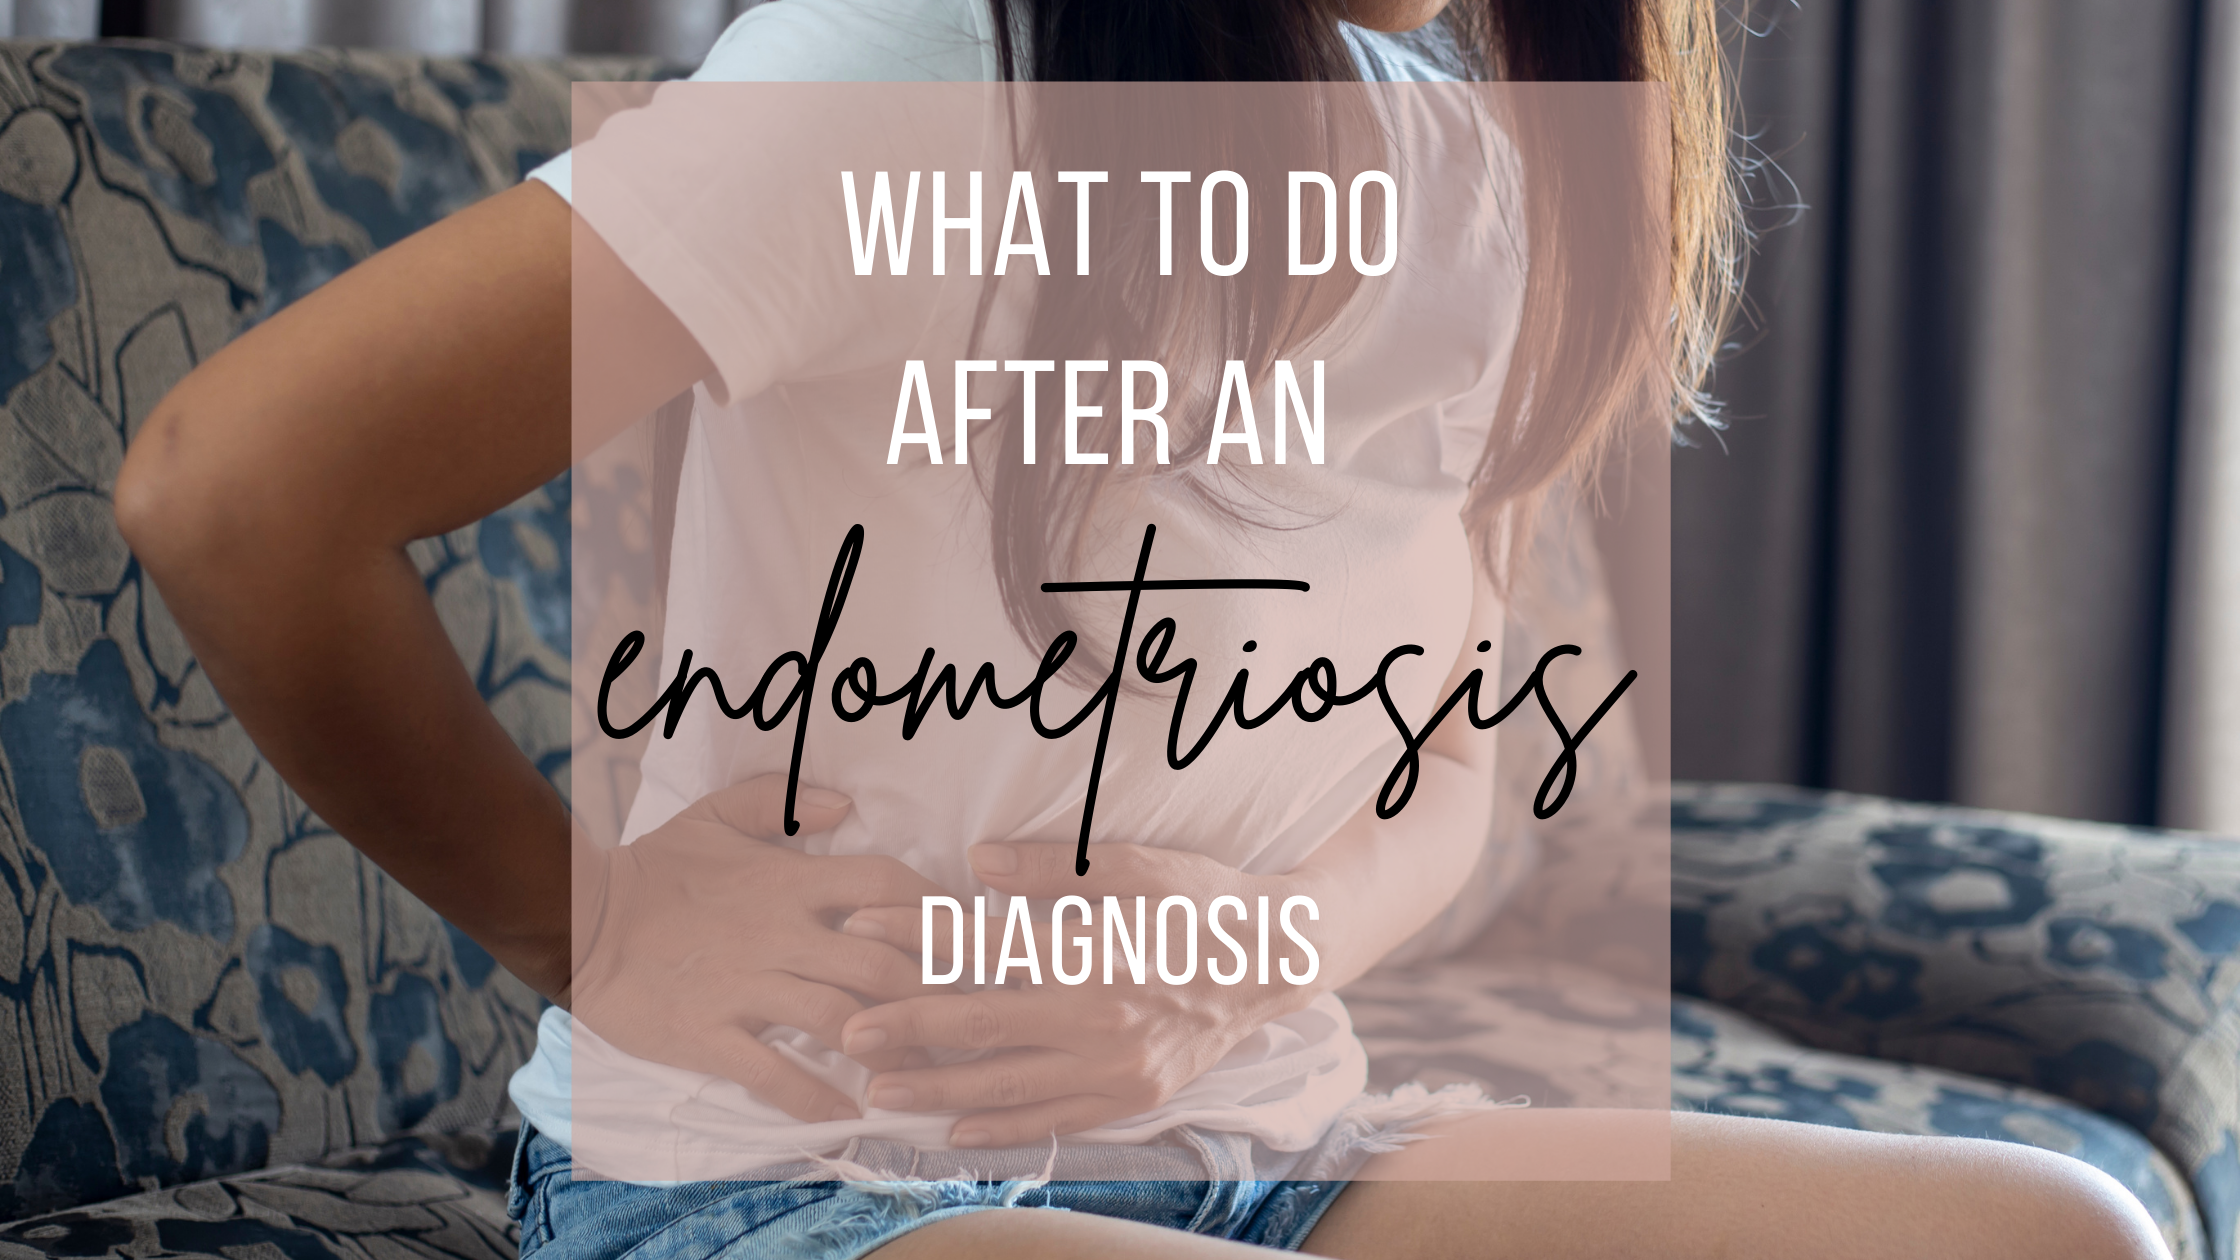 What to do after an endometriosis diagnosis